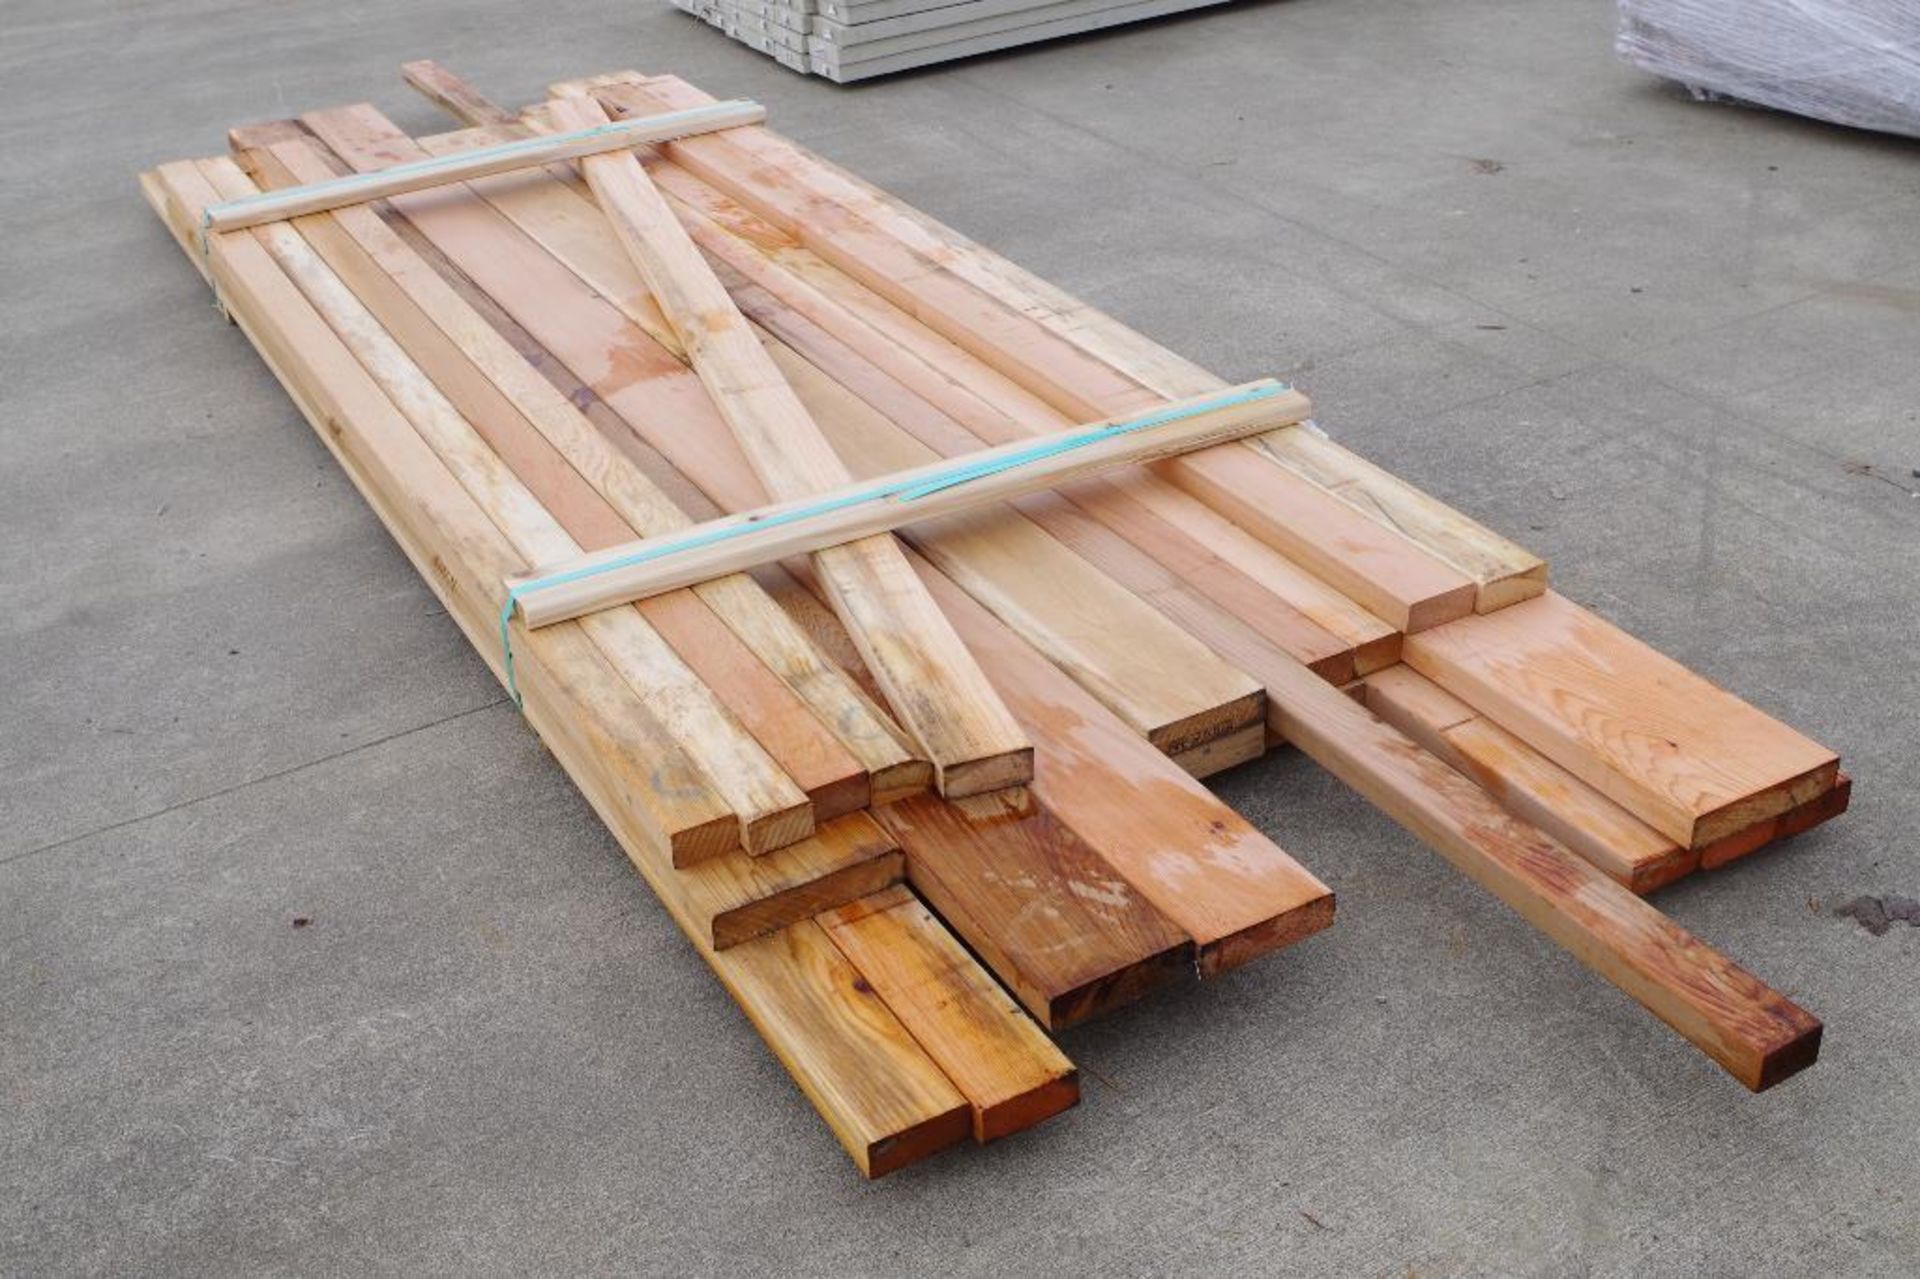 [QTY] Clear Cedar Boards, 2x8, 2x6's, 2x4's & 2x3's, Lengths up to 10' - Image 4 of 4